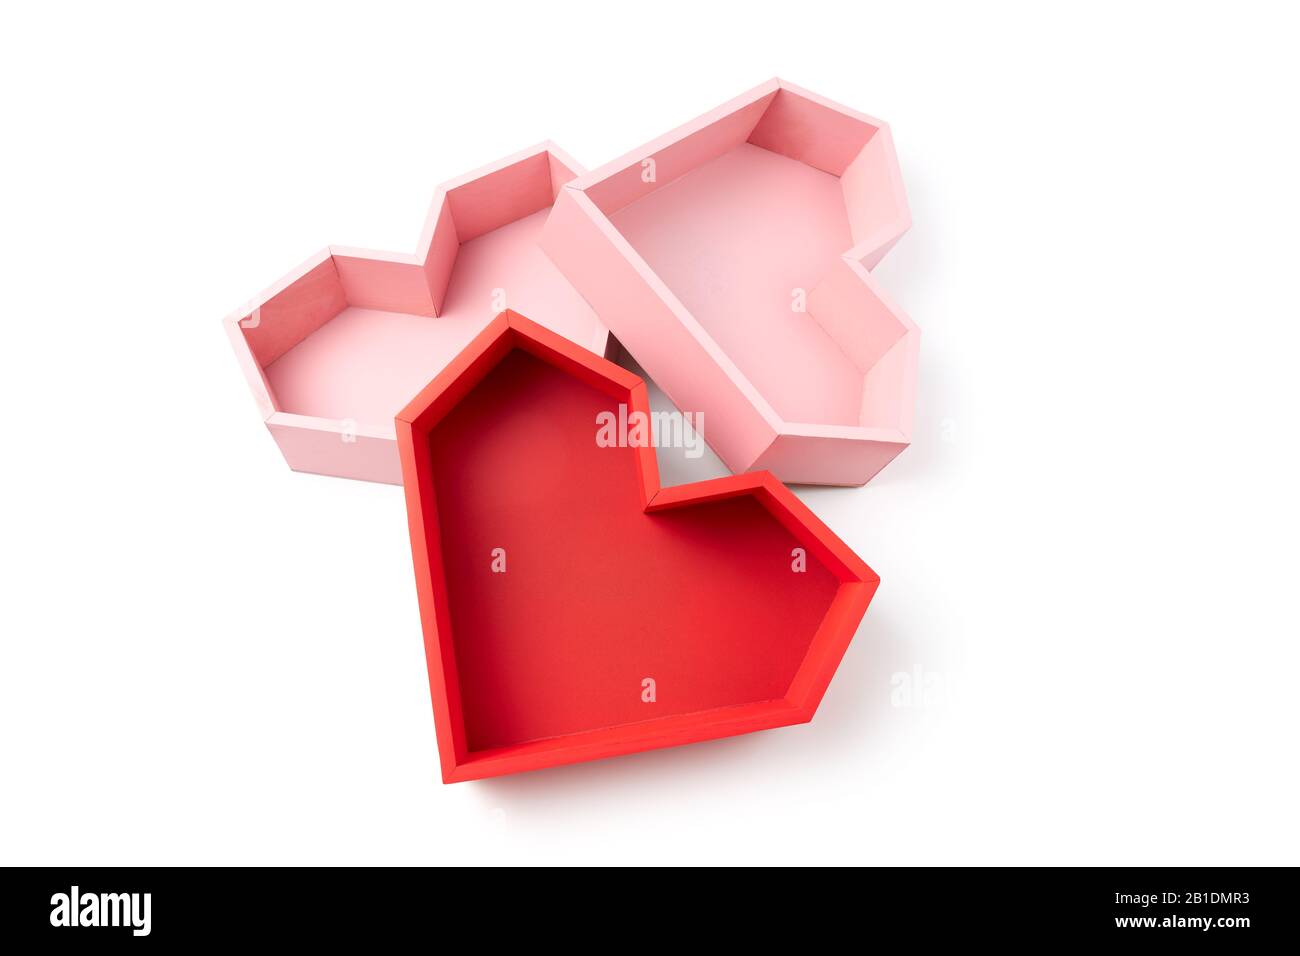 Empty boxes in the form of pink and red faceted hearts on a white background. Stock Photo